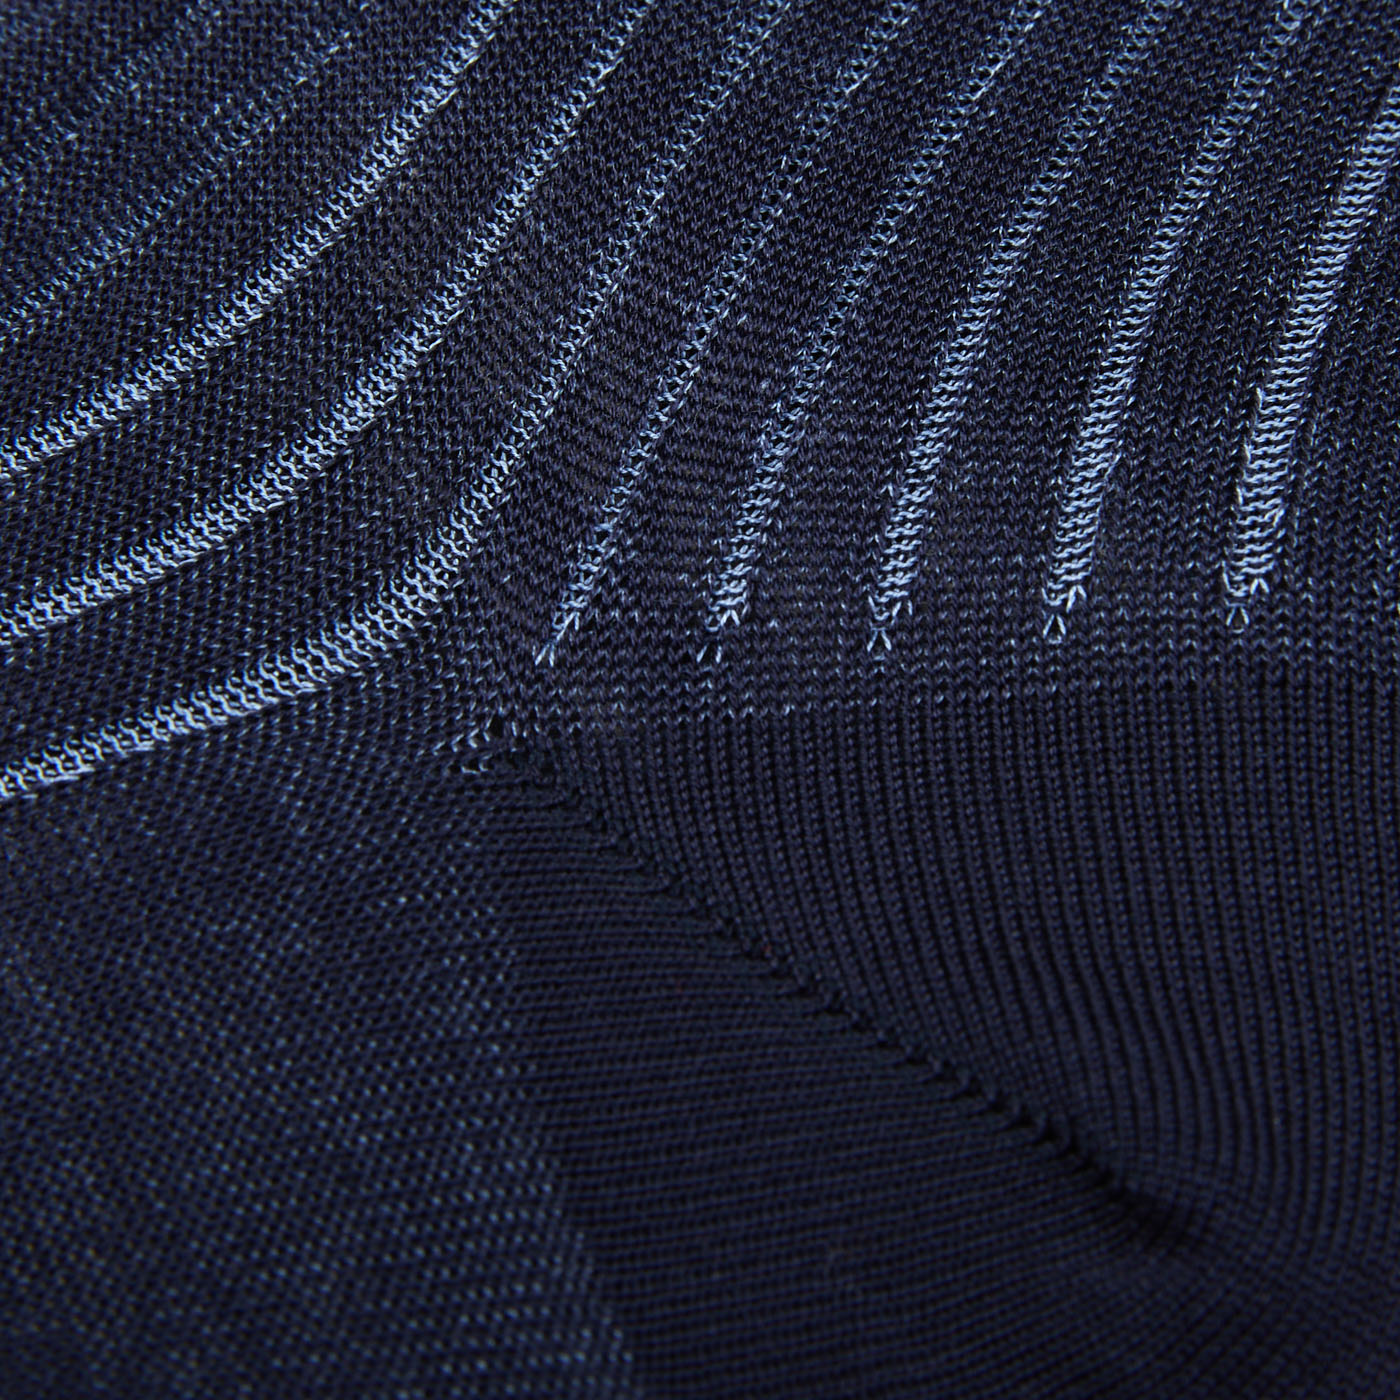 A close up image of a blue Navy Ribbed Cotton Vanisee sock by Canali.